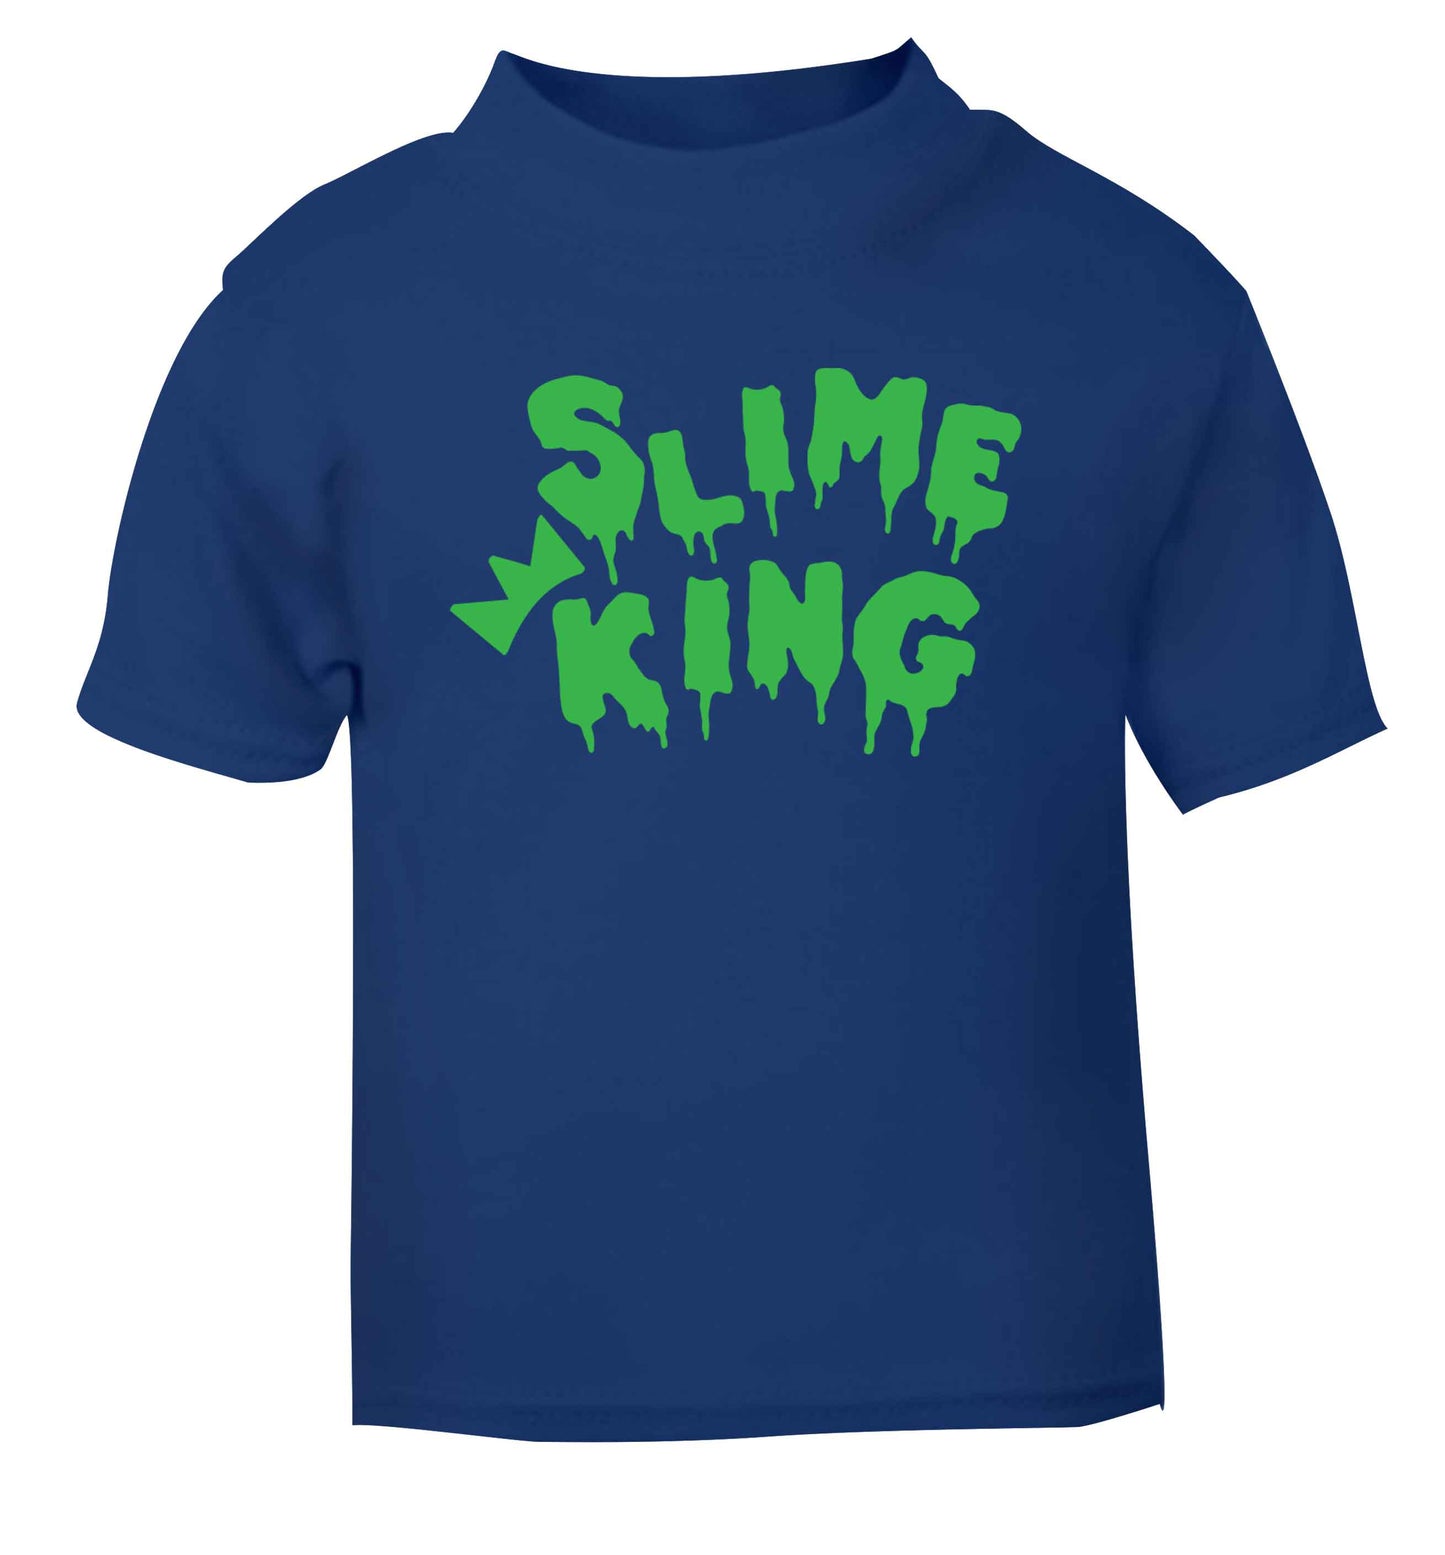 Neon green slime king blue baby toddler Tshirt 2 Years